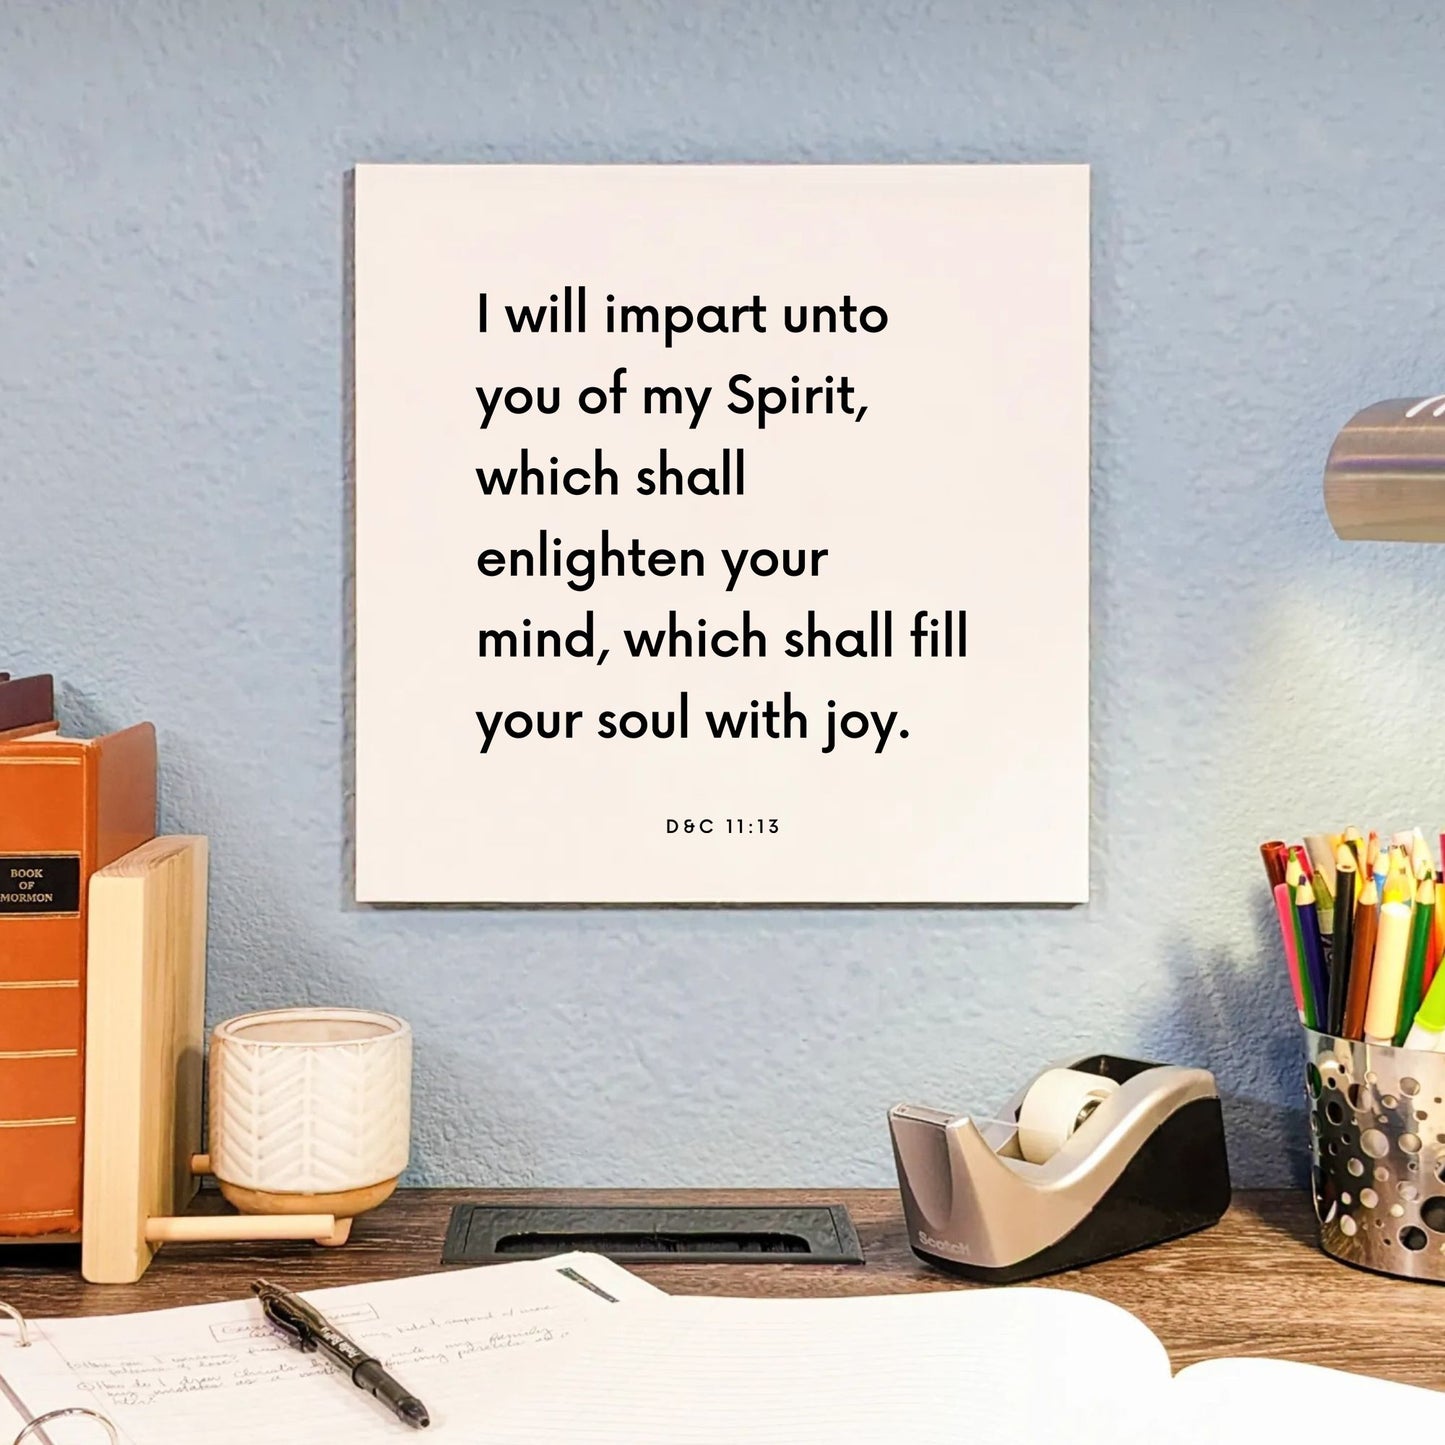 Desk mouting of the scripture tile for D&C 11:13 - "I will impart unto you of my Spirit"